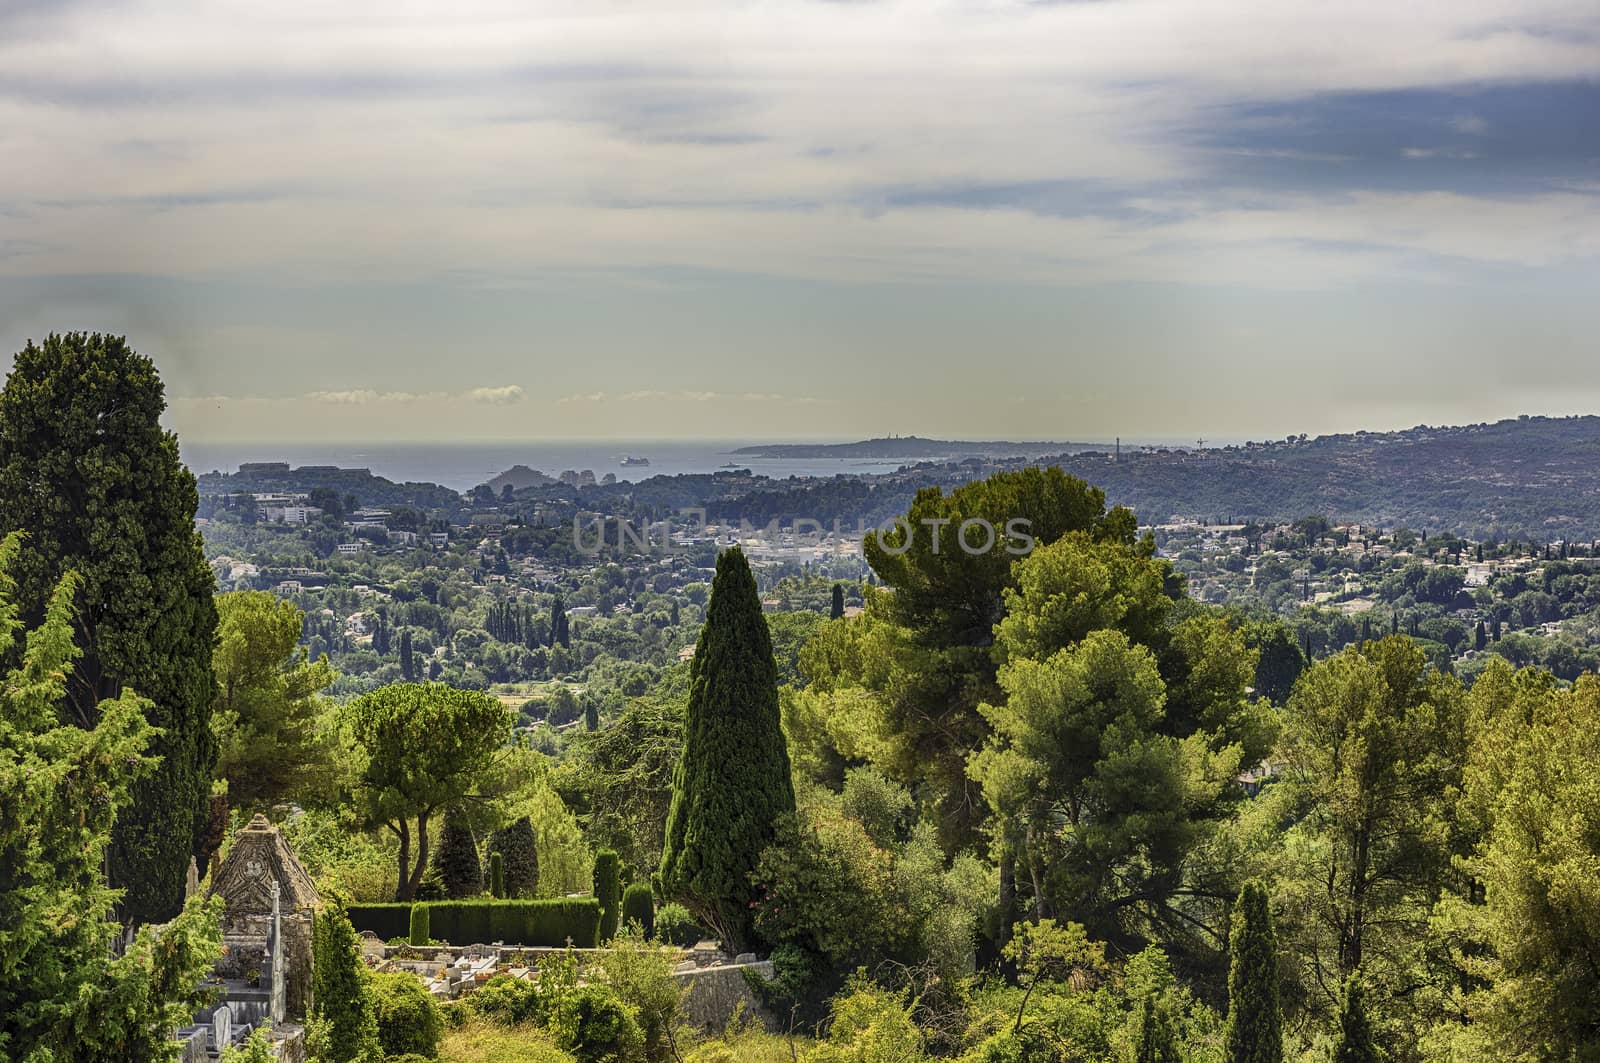 Scenic view in the town of Saint-Paul-de-Vence, Cote d'Azur, Fra by marcorubino